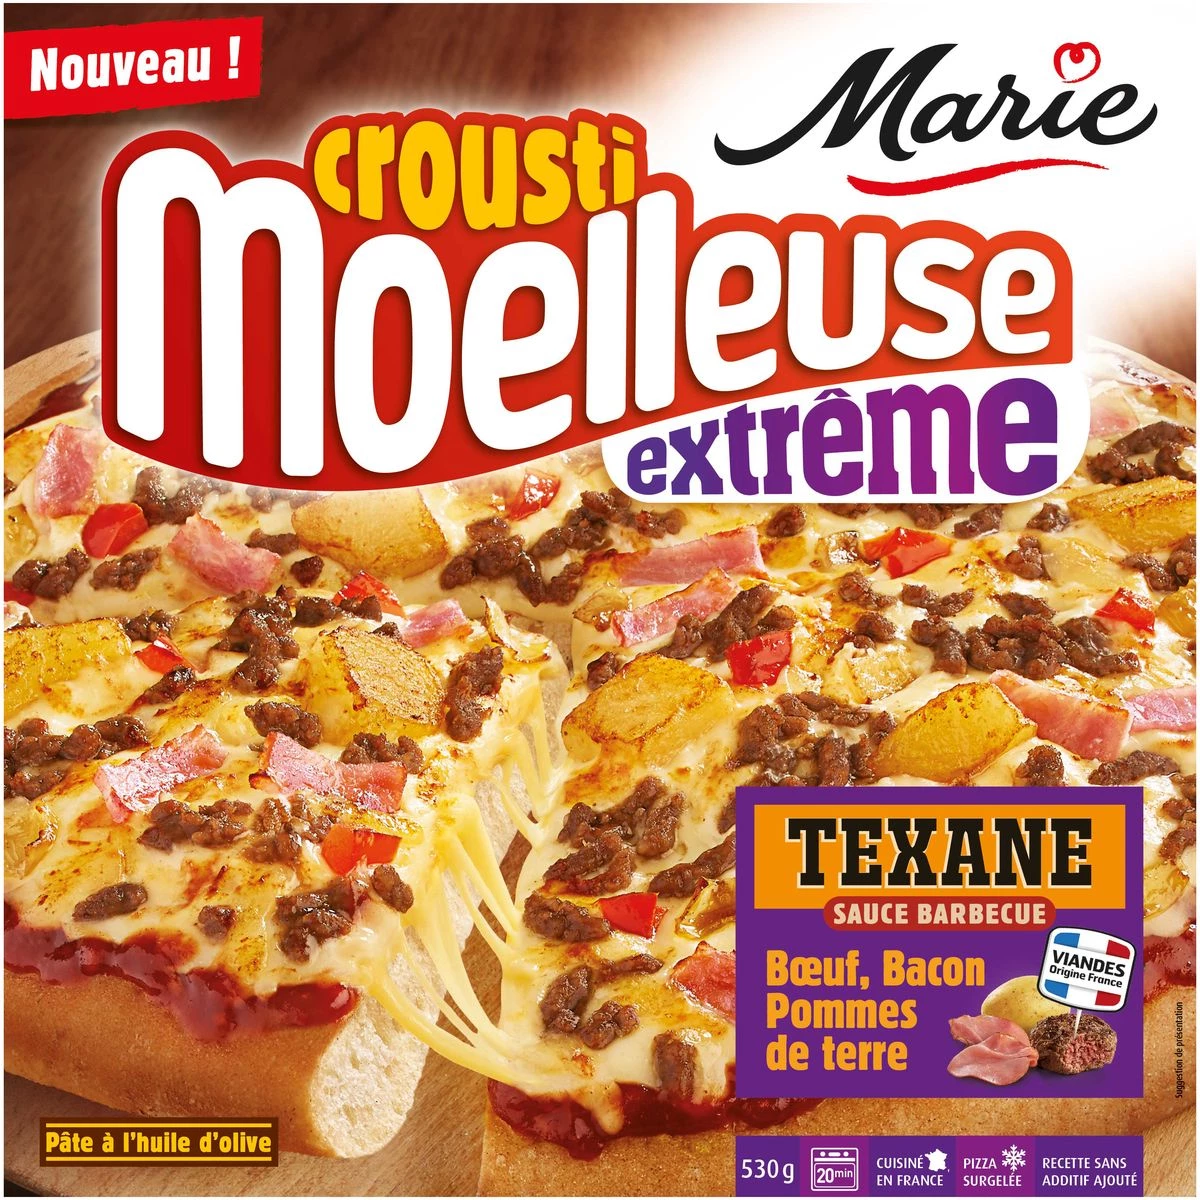 Pizza texane sauce barbecue 530g - MARIE